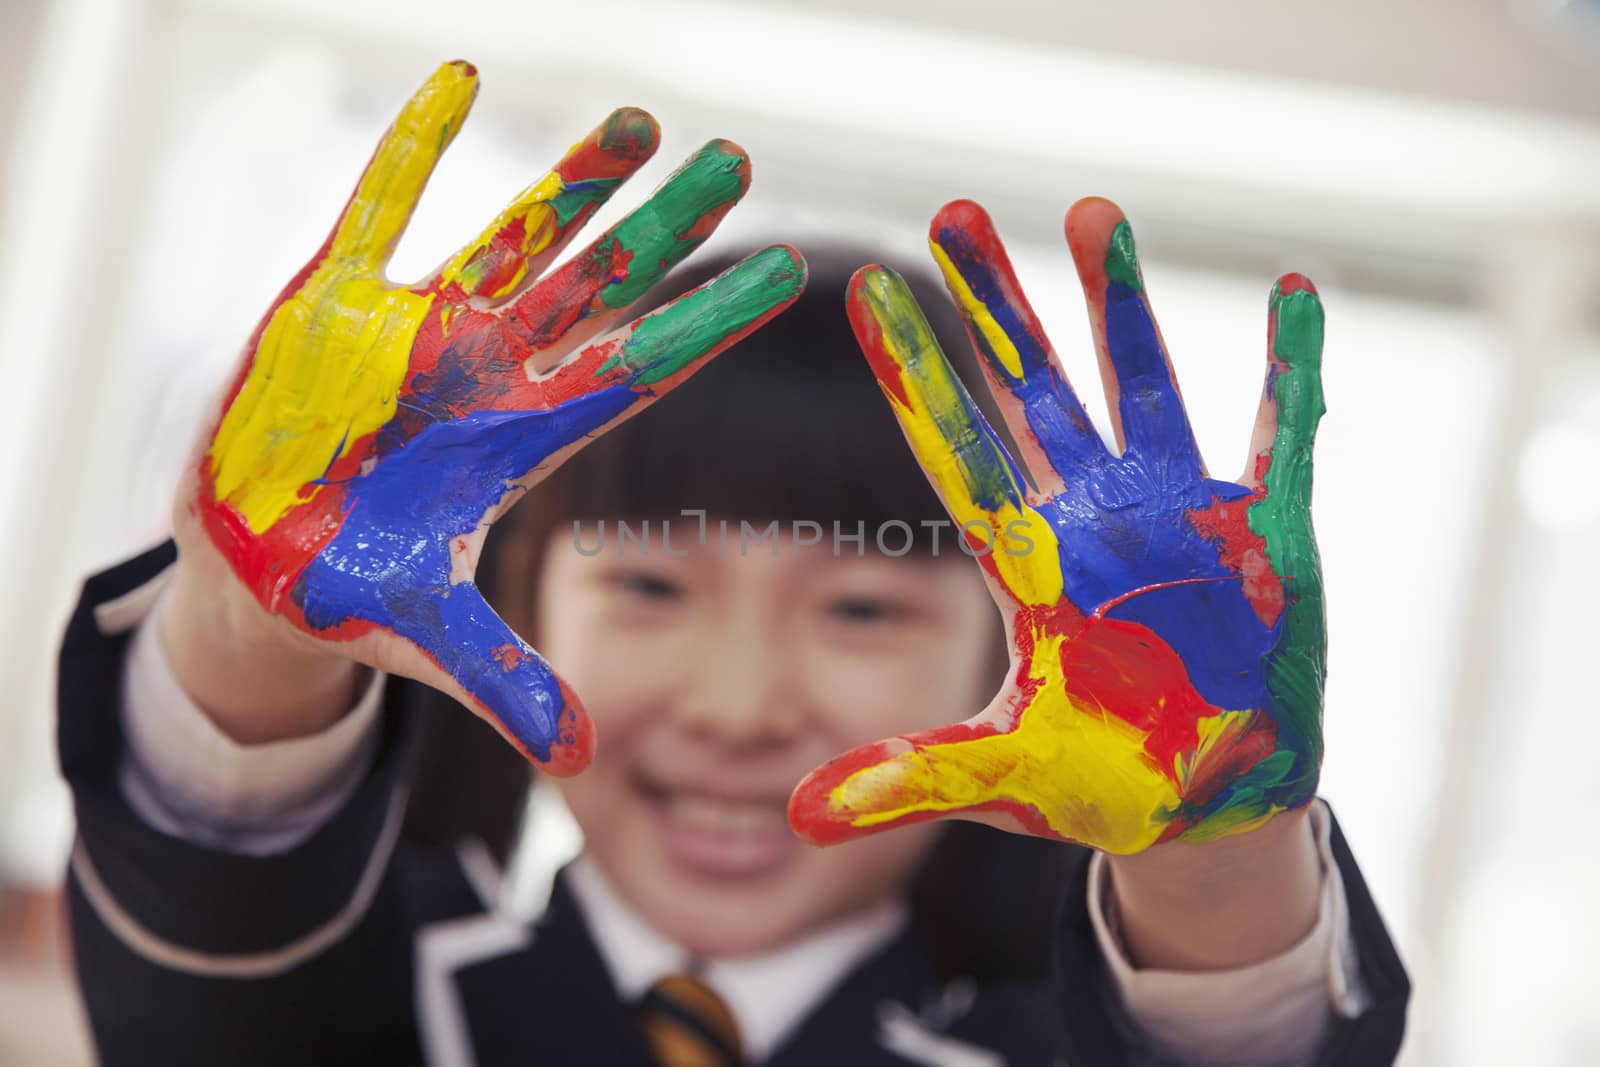 Smiling schoolgirl finger painting, close up on hands